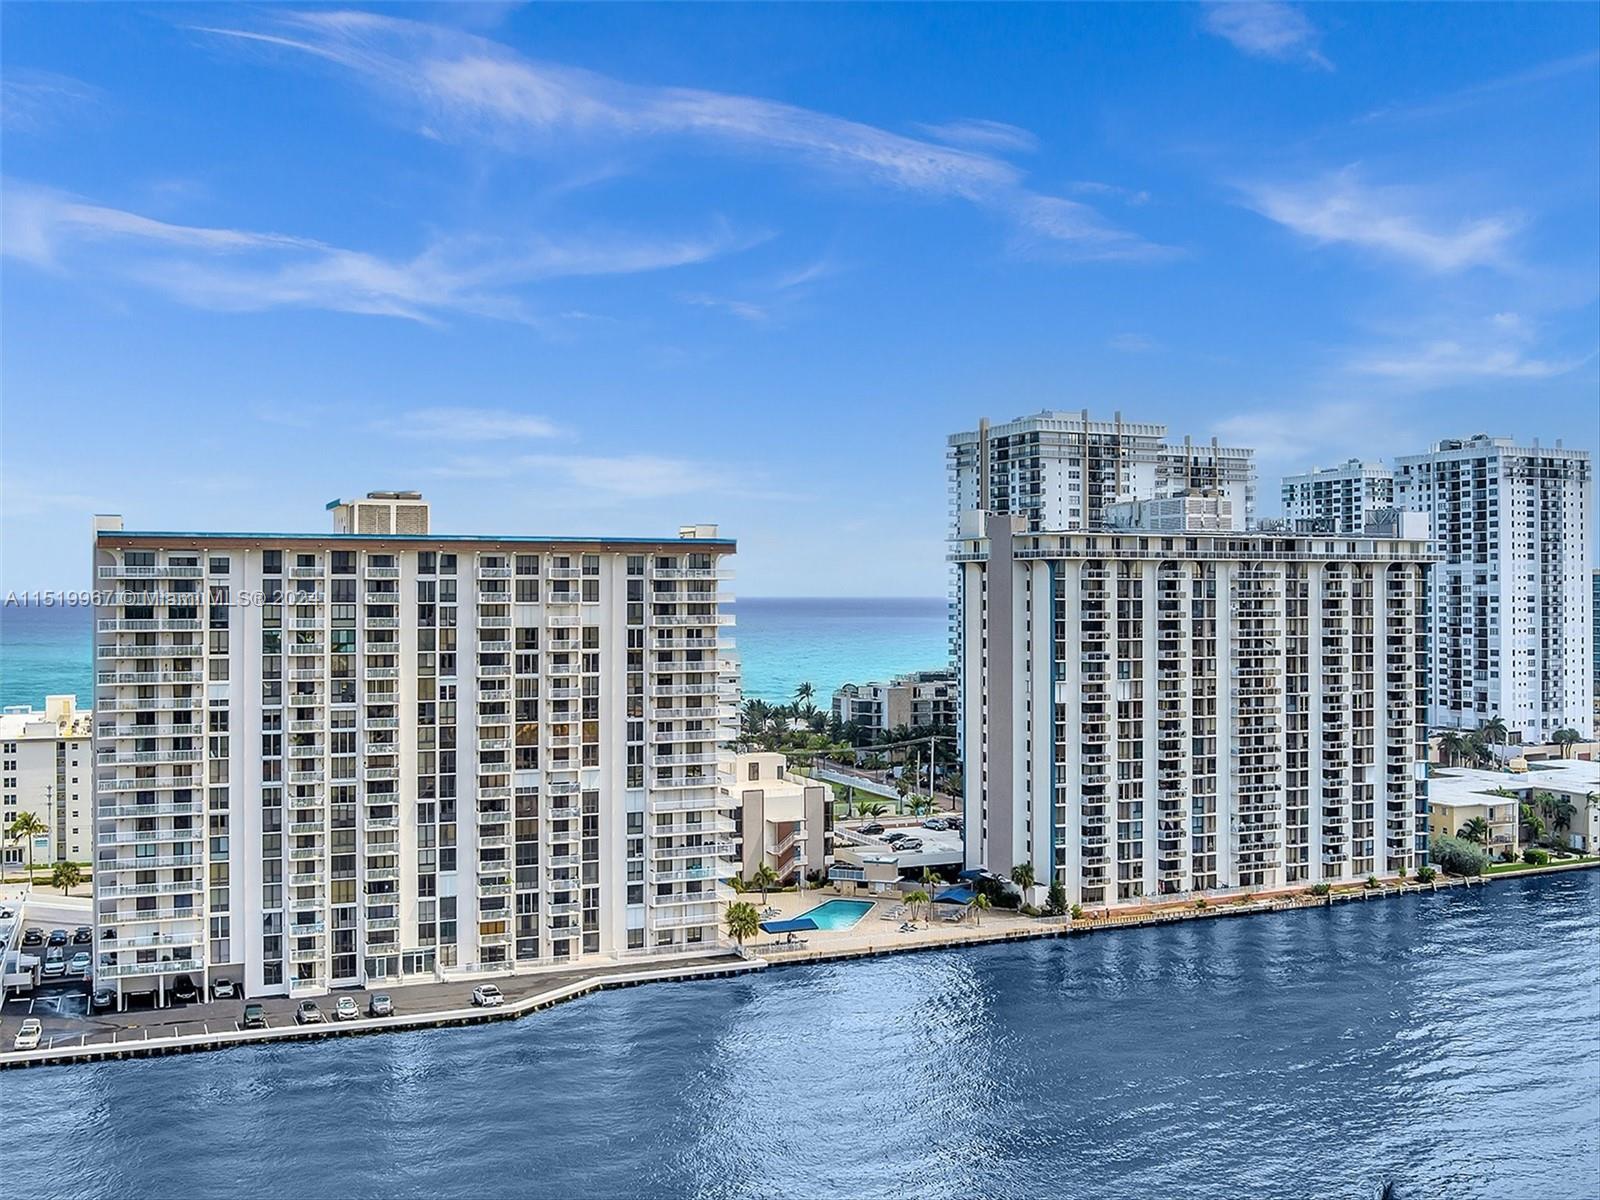 Photo of 1500 S Ocean Dr #11B in Hollywood, FL